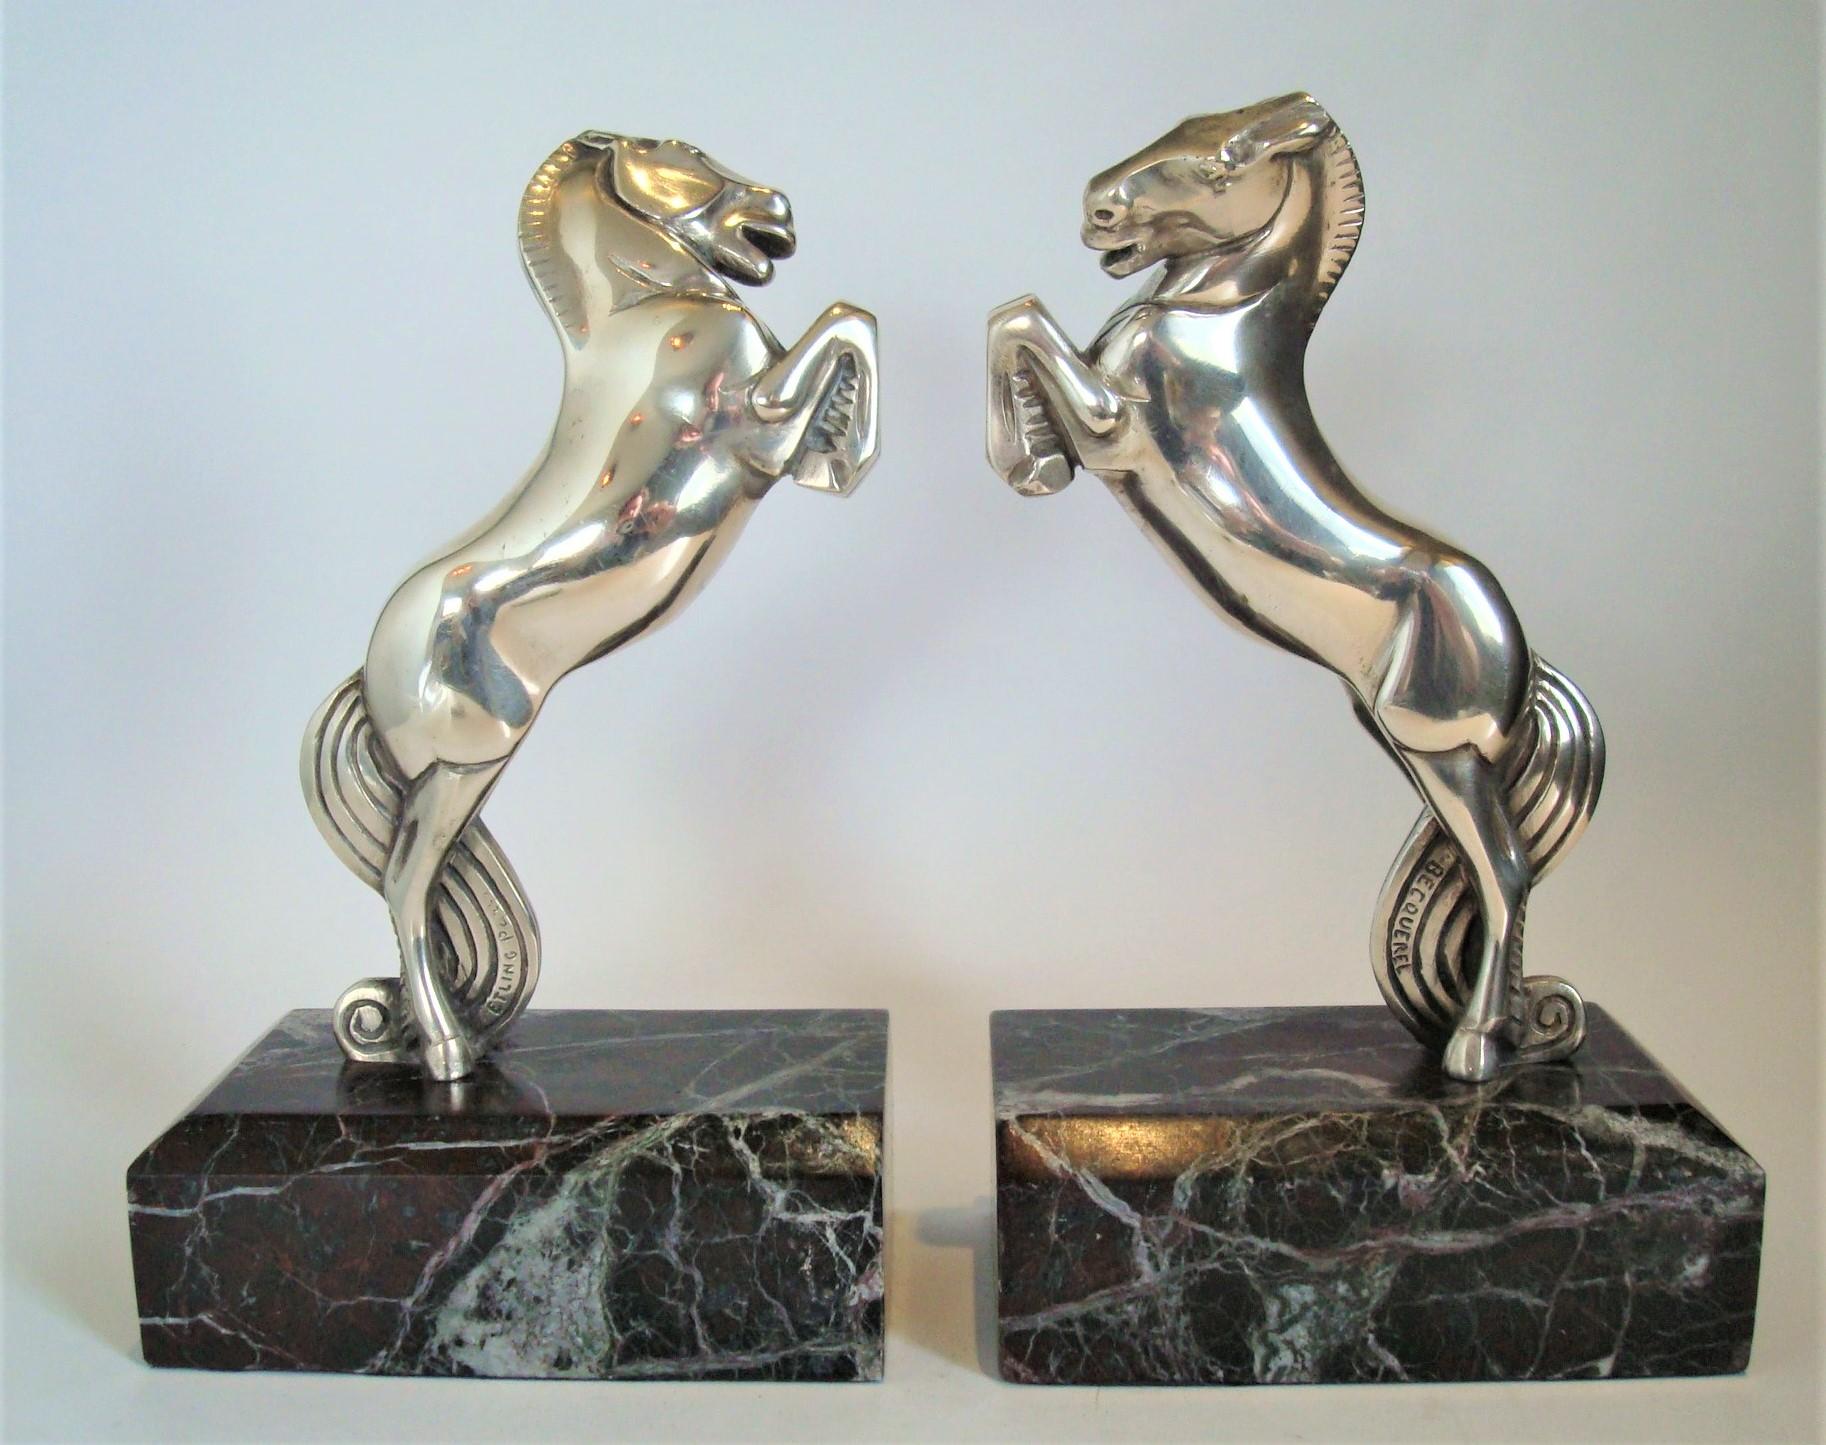 Pair of Art Deco silvered bronze horse bookends and mounted over marble bases. Signed Becquerel and foundry Etling, Paris. Same sculpture has been used as car mascot / hood ornament.
Perfect gift for any polo, equestrian fan.